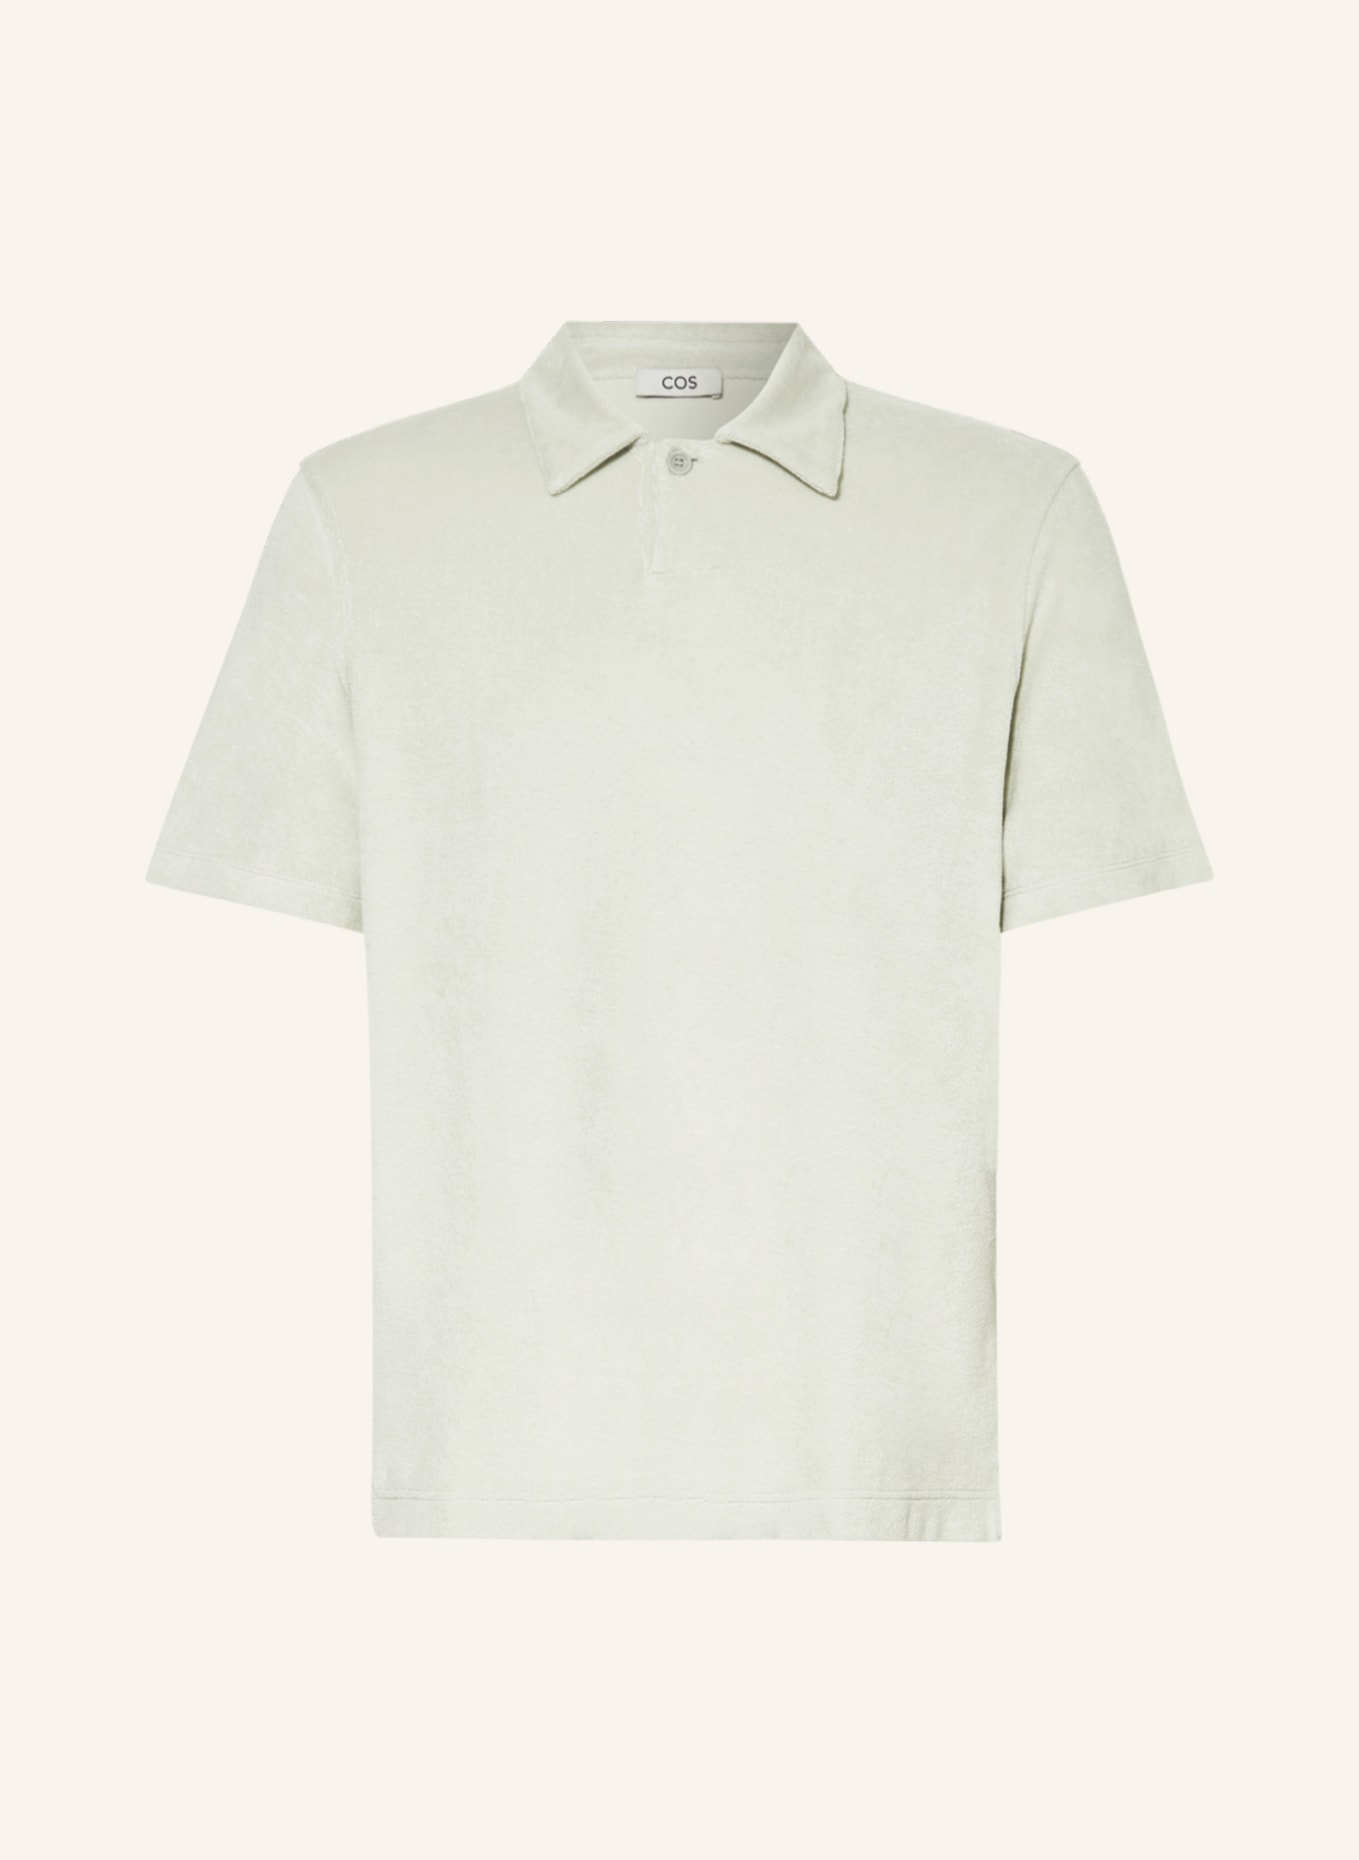 COS Terry cloth polo shirt regular fit, Color: MINT (Image 1)